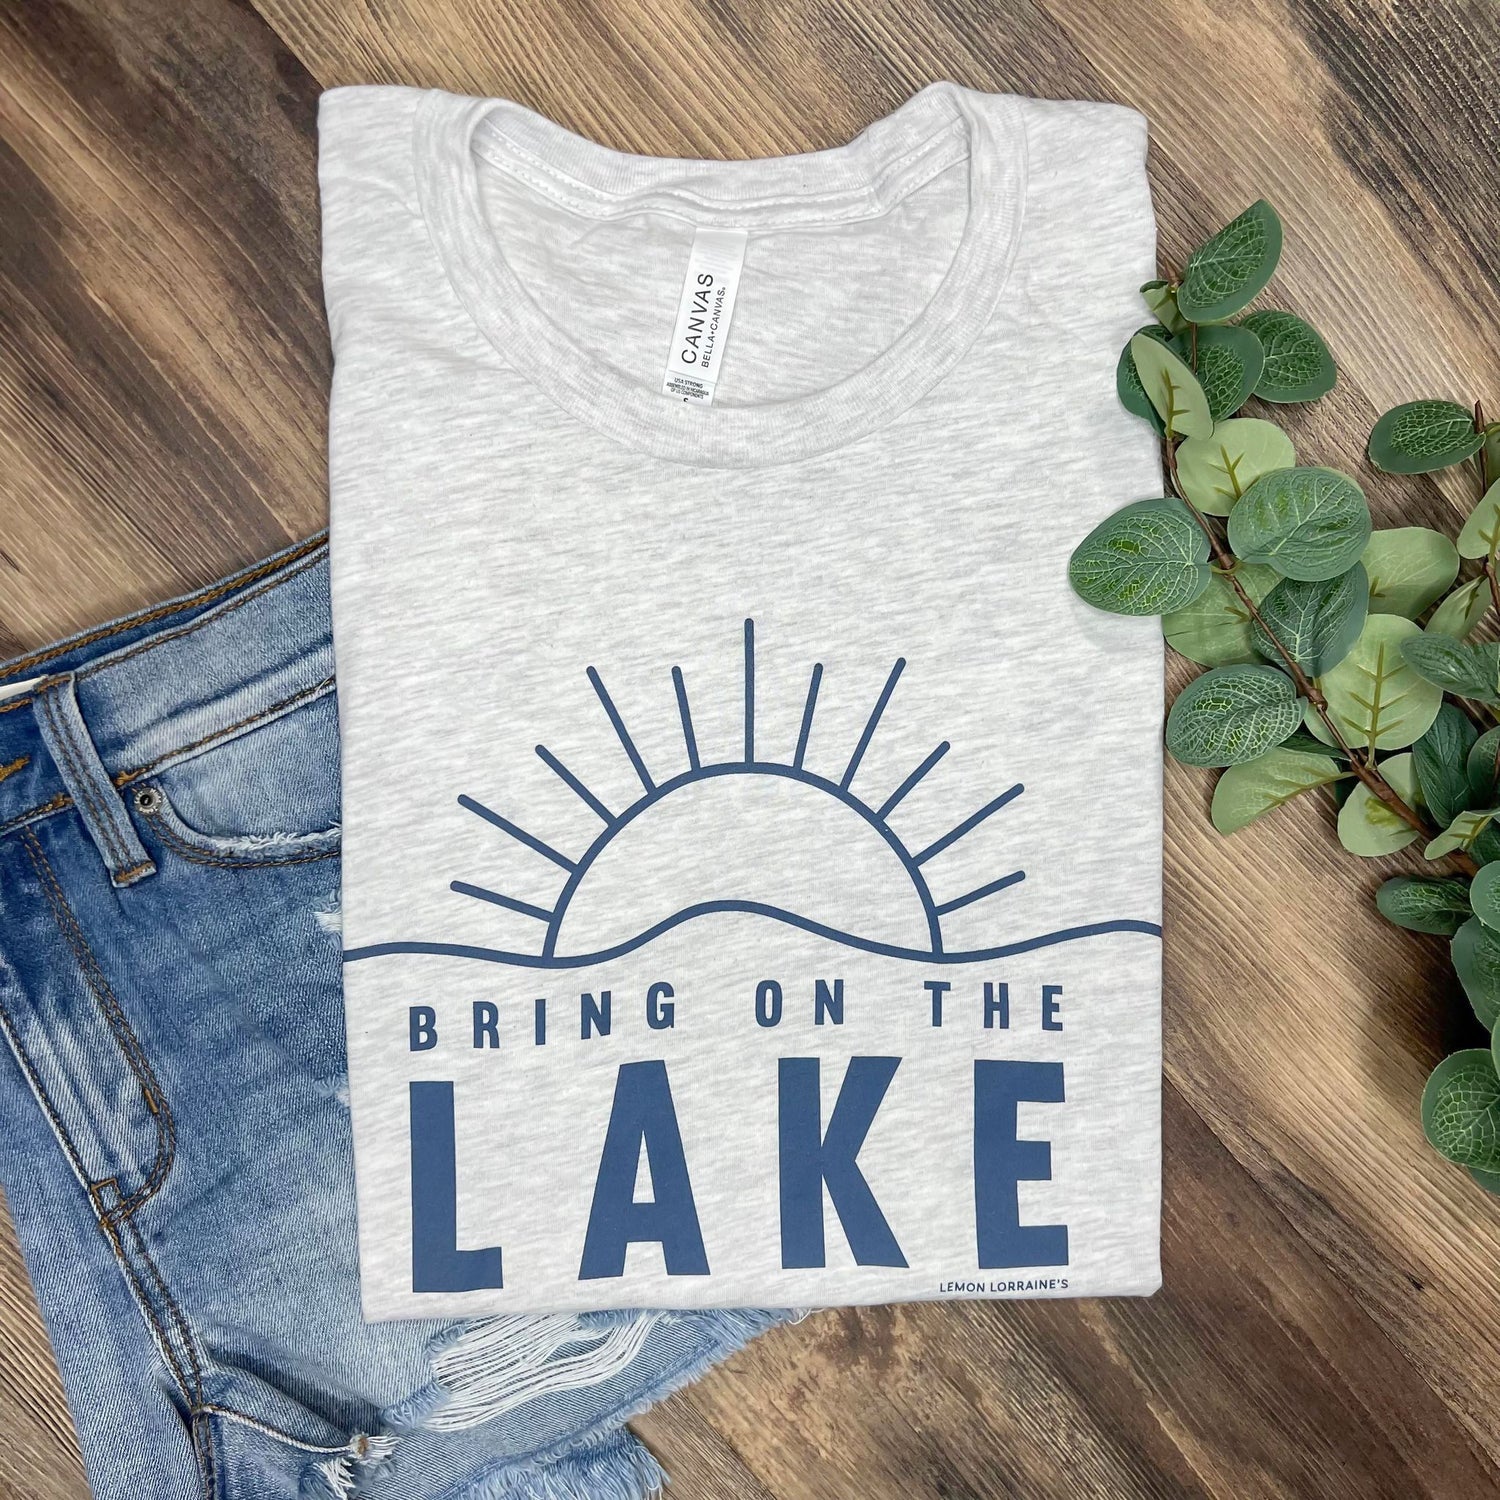 BRING ON THE LAKE - Graphic Tee